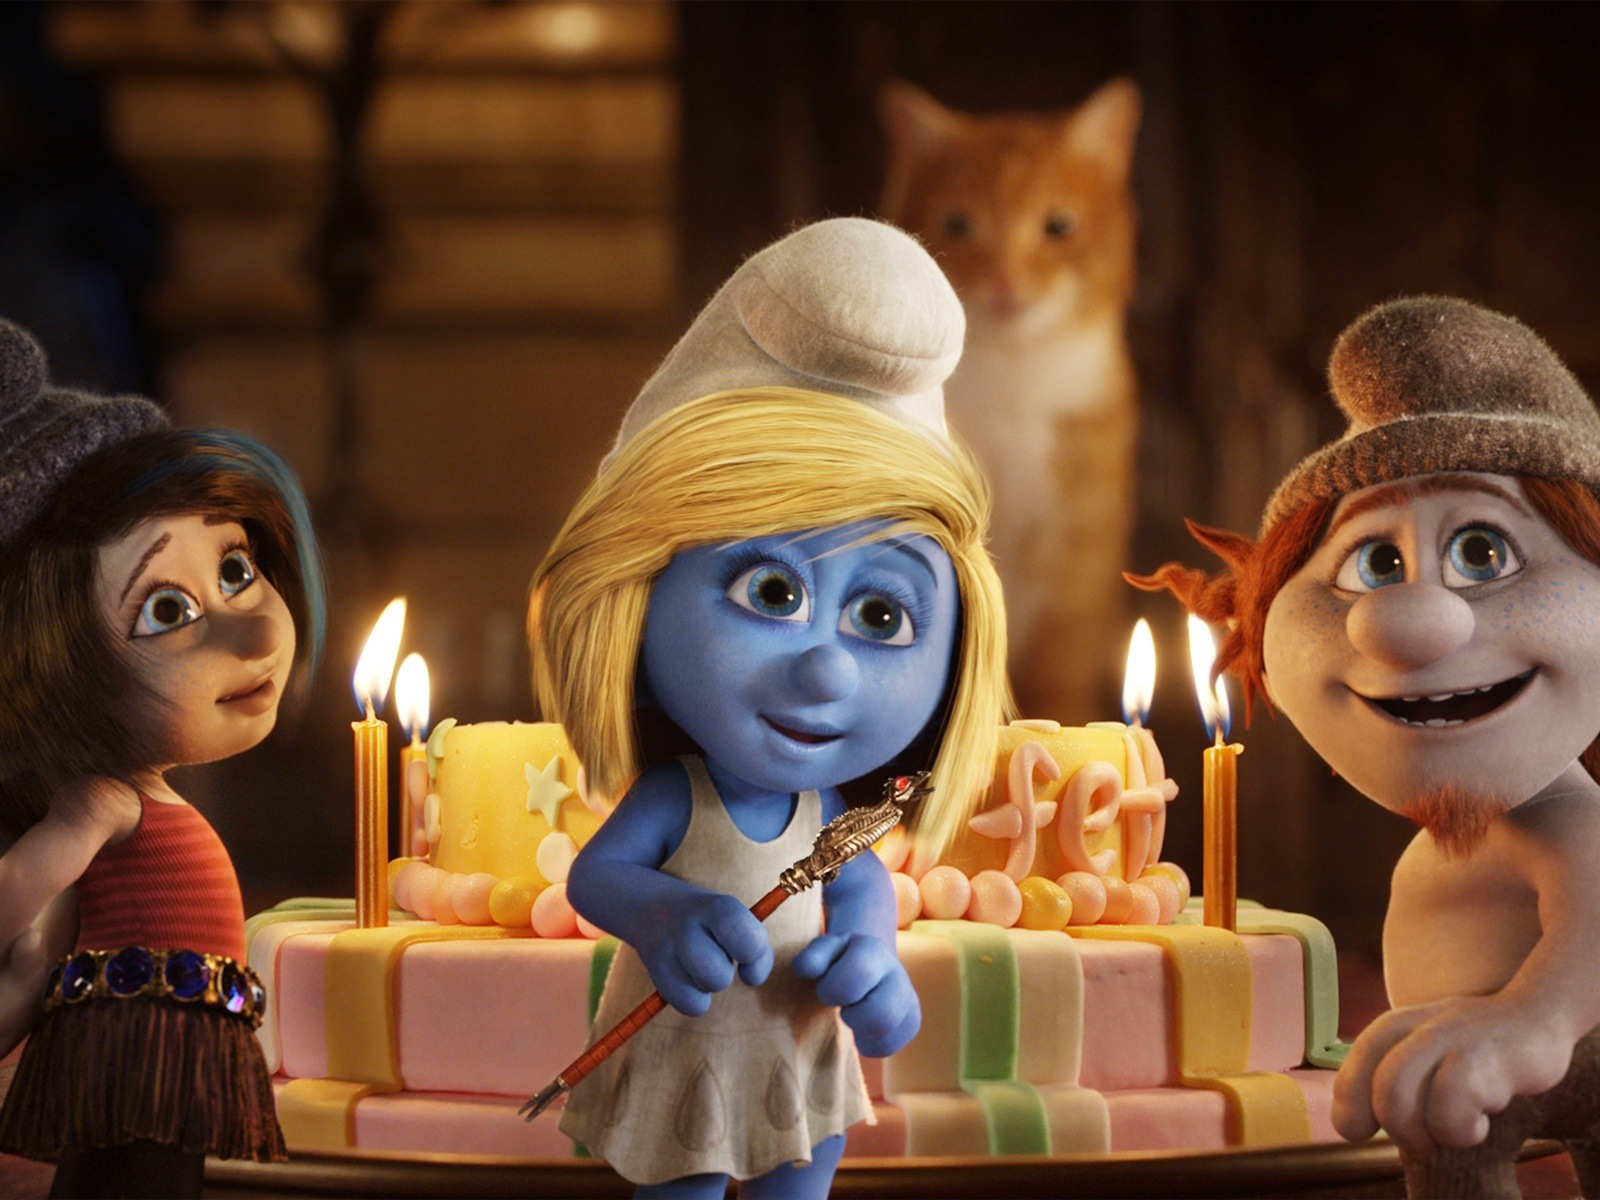 The Smurfs 2 HD movie wallpapers #2 - 1600x1200